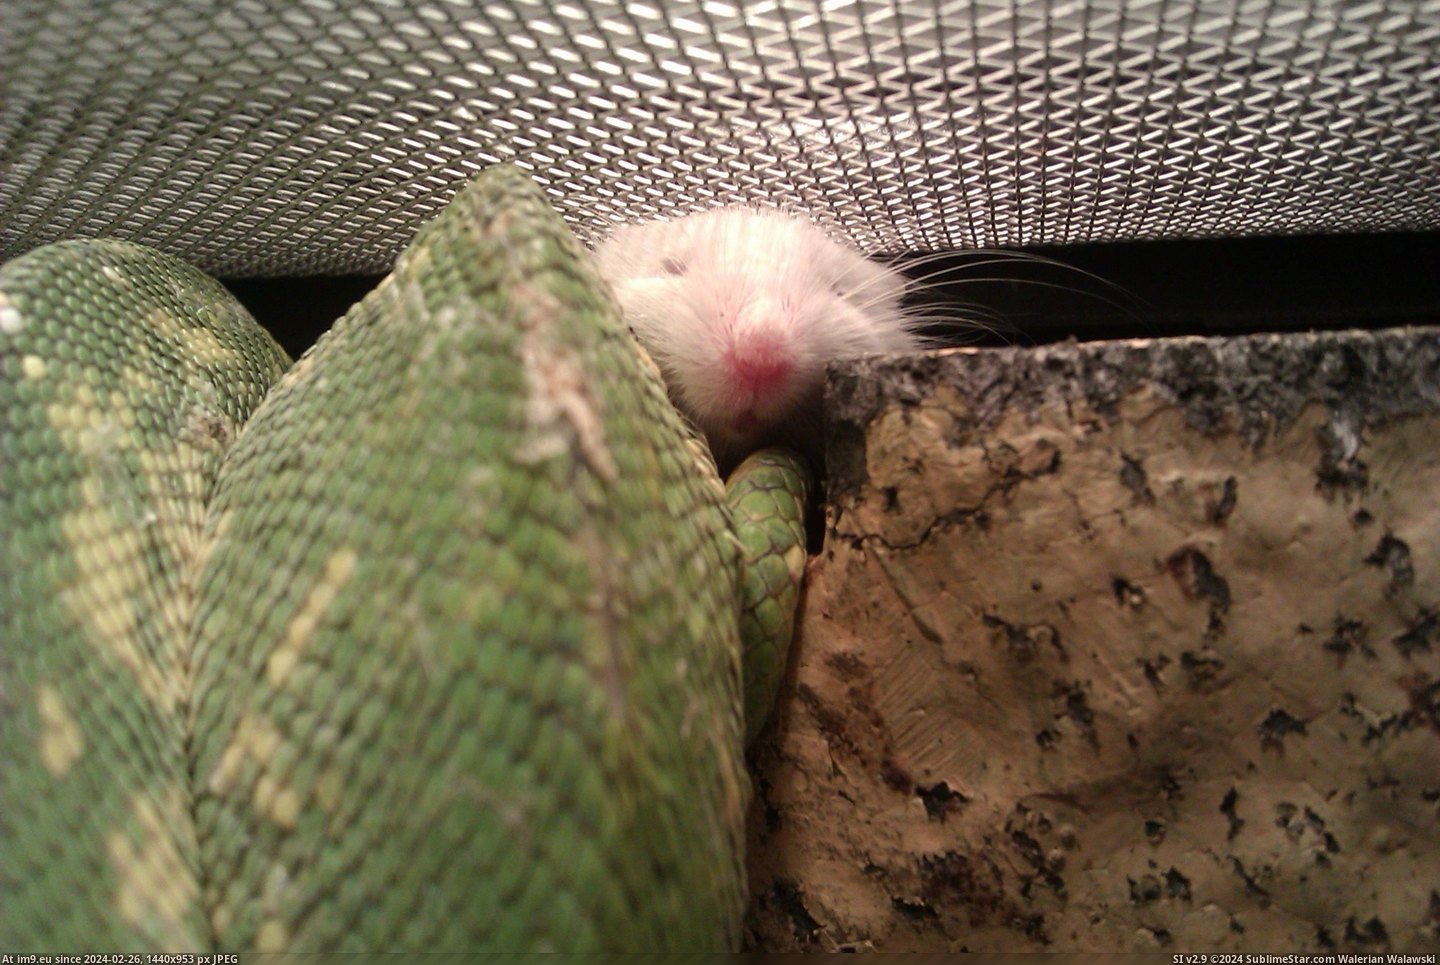 #Night #Eat #Heat #Lamp #Lived #Refuses #Togeth #Mouse #Snake #Cuddle [Aww] This snake and mouse cuddle under the heat lamp every night. He refuses to eat this particular mouse. They've lived togeth Pic. (Image of album My r/AWW favs))